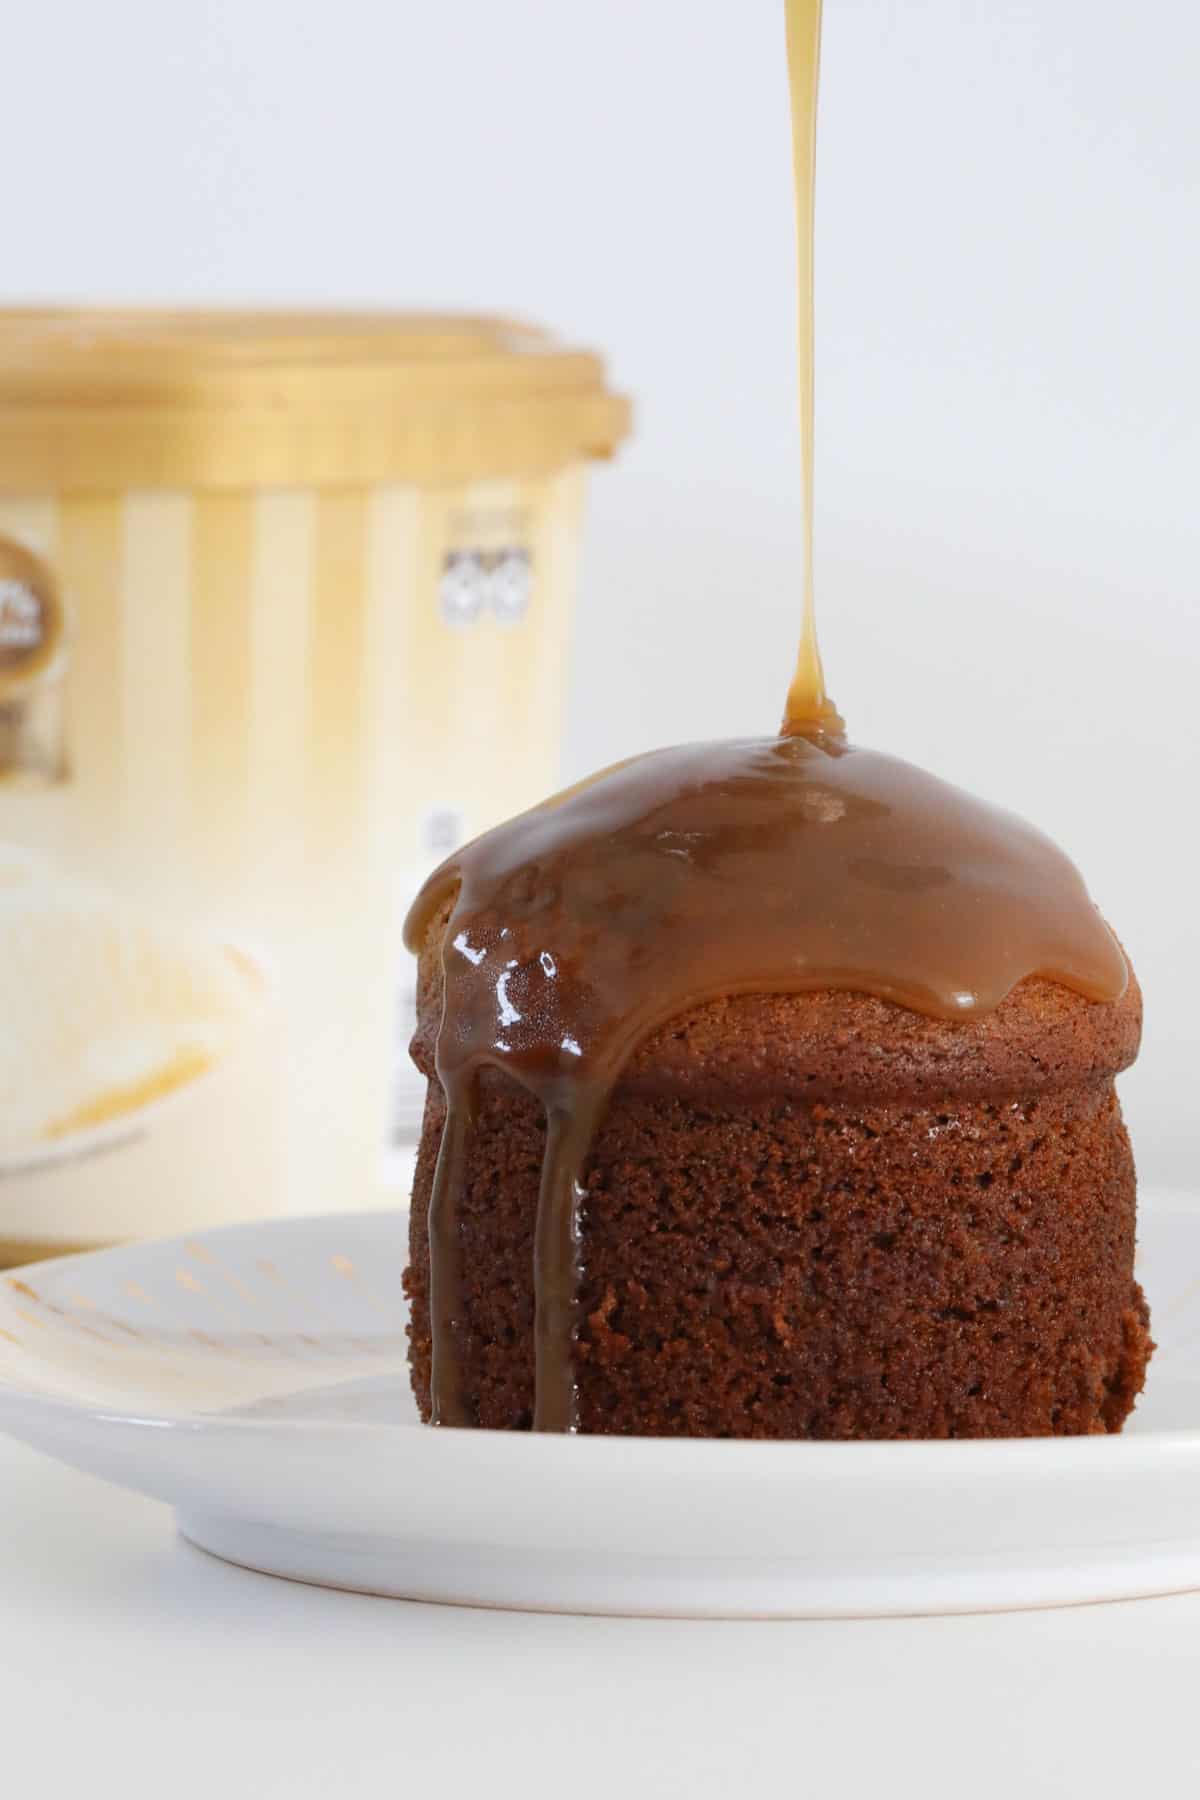 caramel sauce being poured over a mini sticky date pudding on a plate.